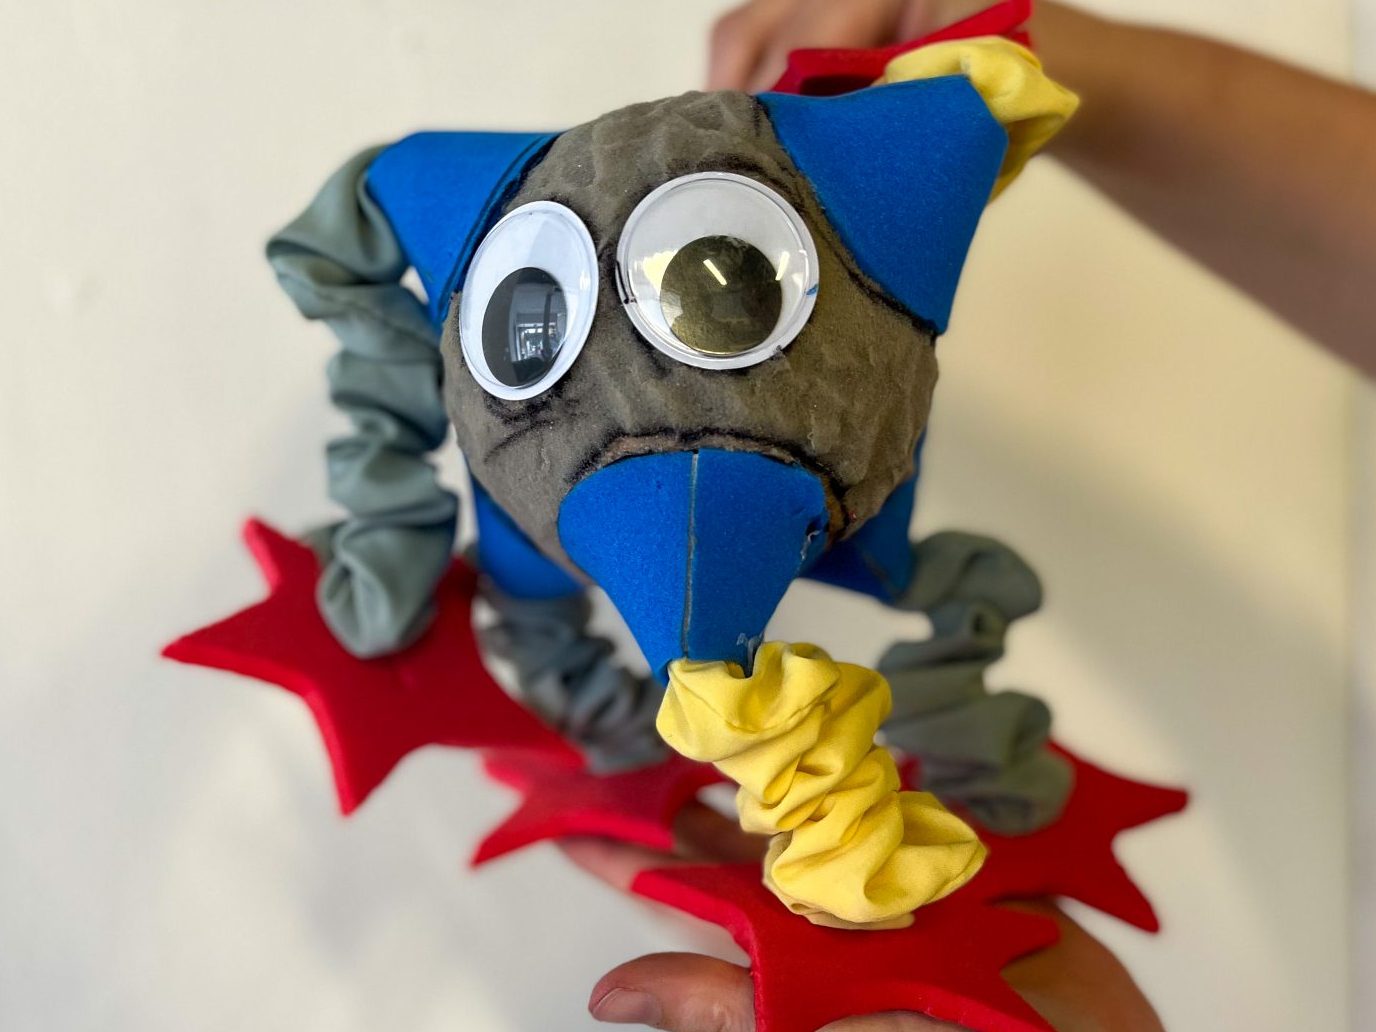 Puppet with large goggley eyes